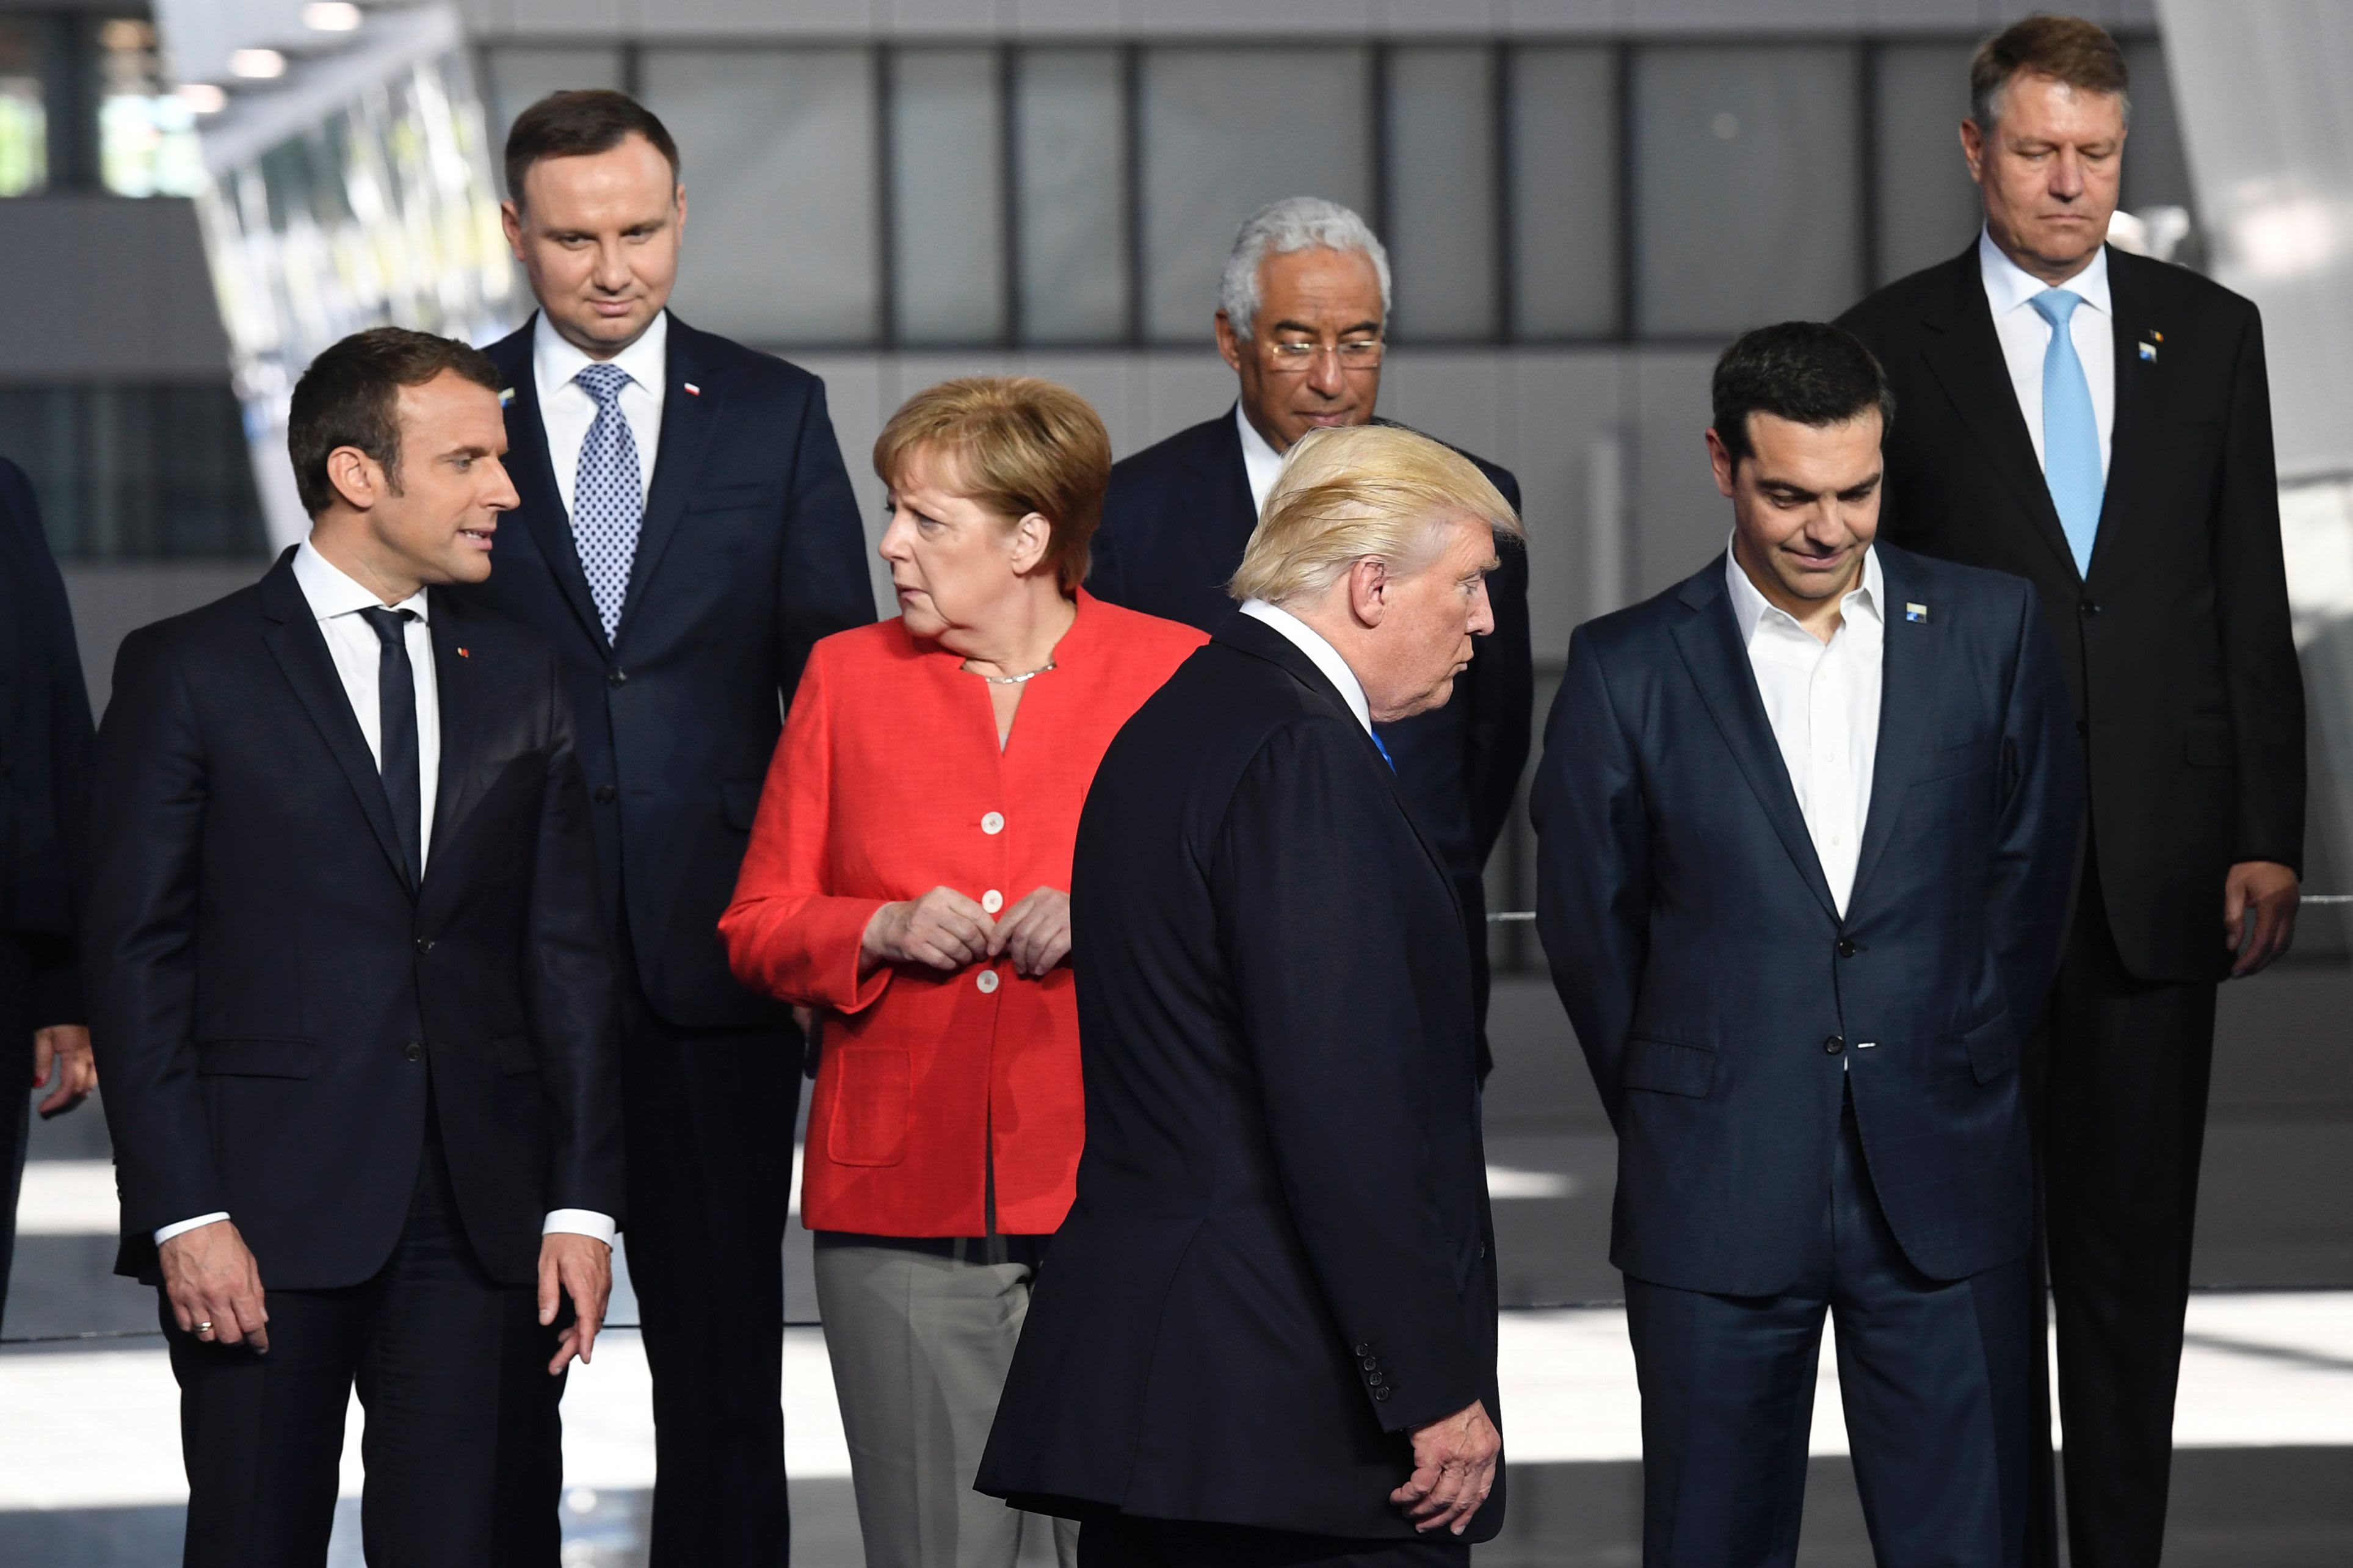 Trump does not mention support for Article 5 in NATO speech